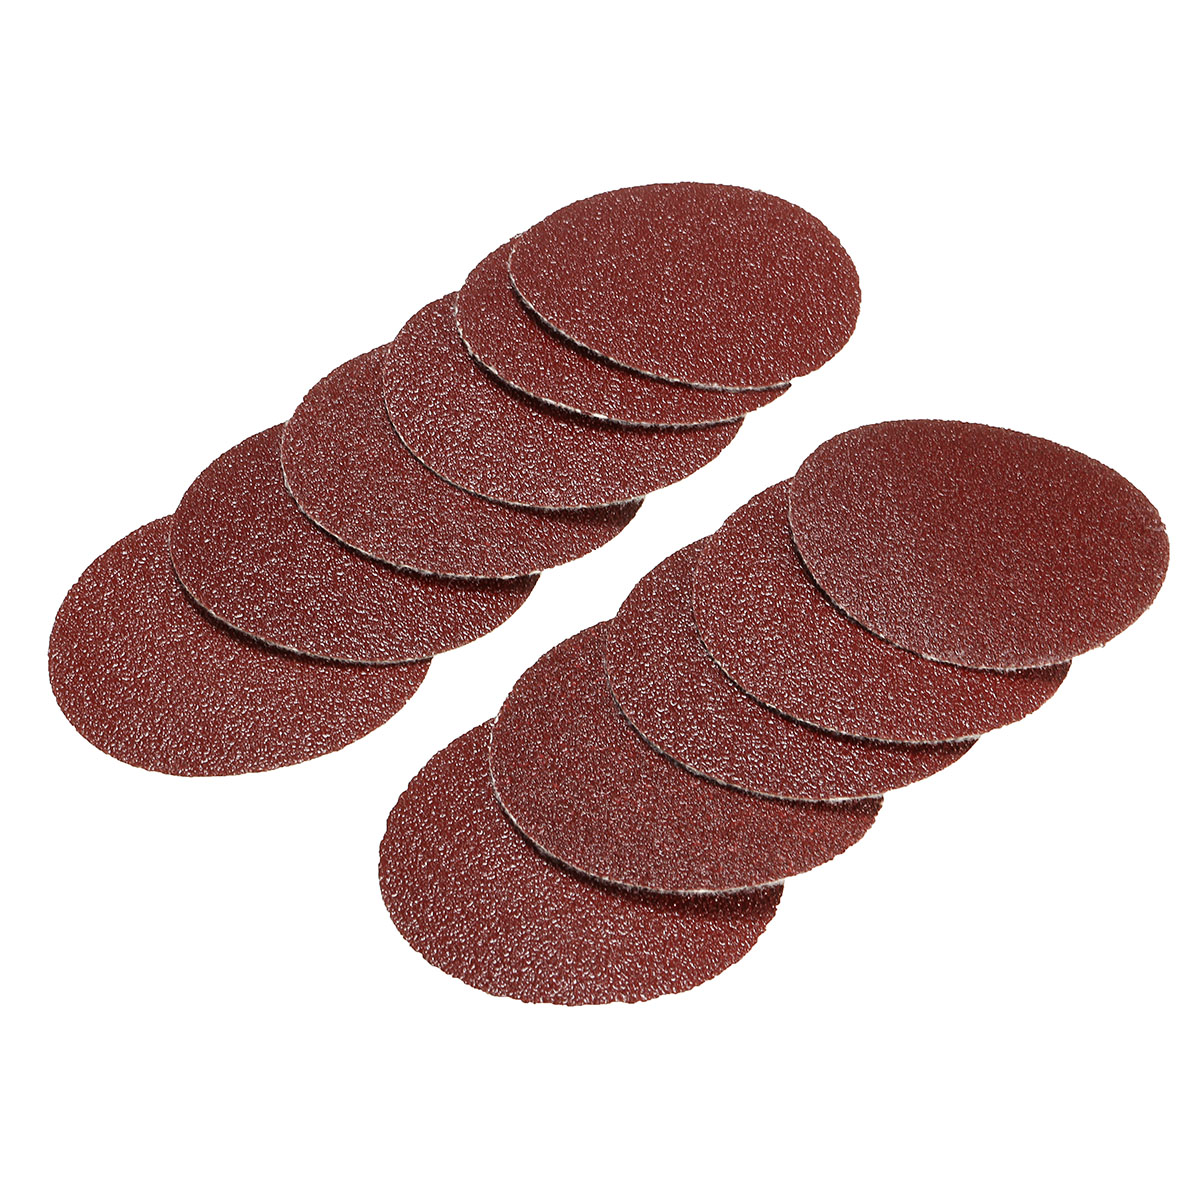 60pcs-3-Inch-6080120-Grit-Sandpaper-with-75mm-Hand-Polishing-Pad-for-Polishing-Abrasive-Tools-1680185-4